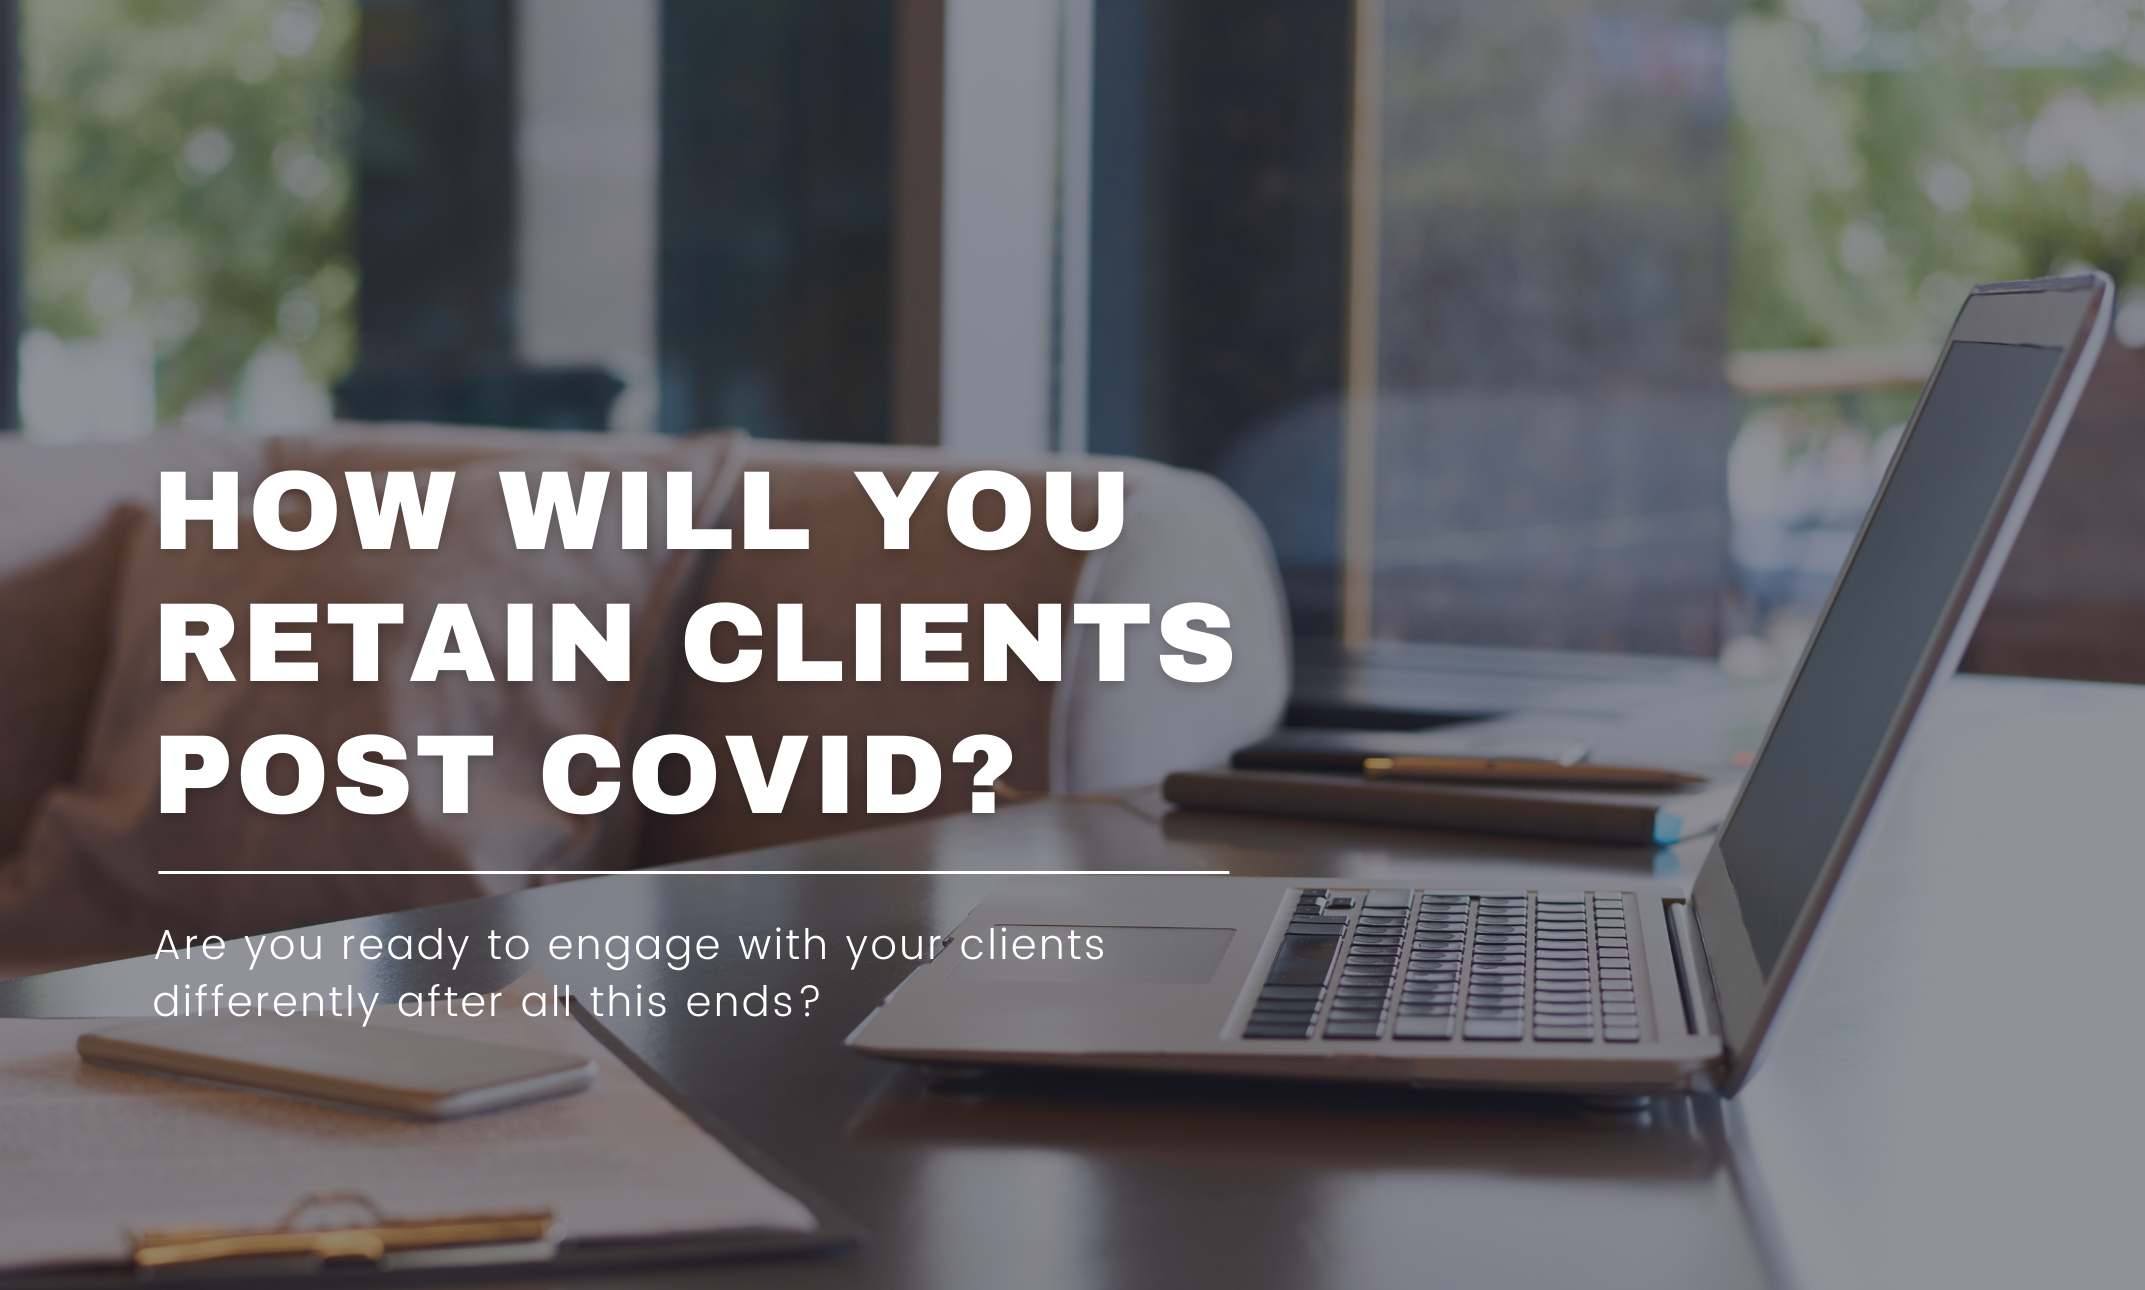 How will you retain clients post-COVID